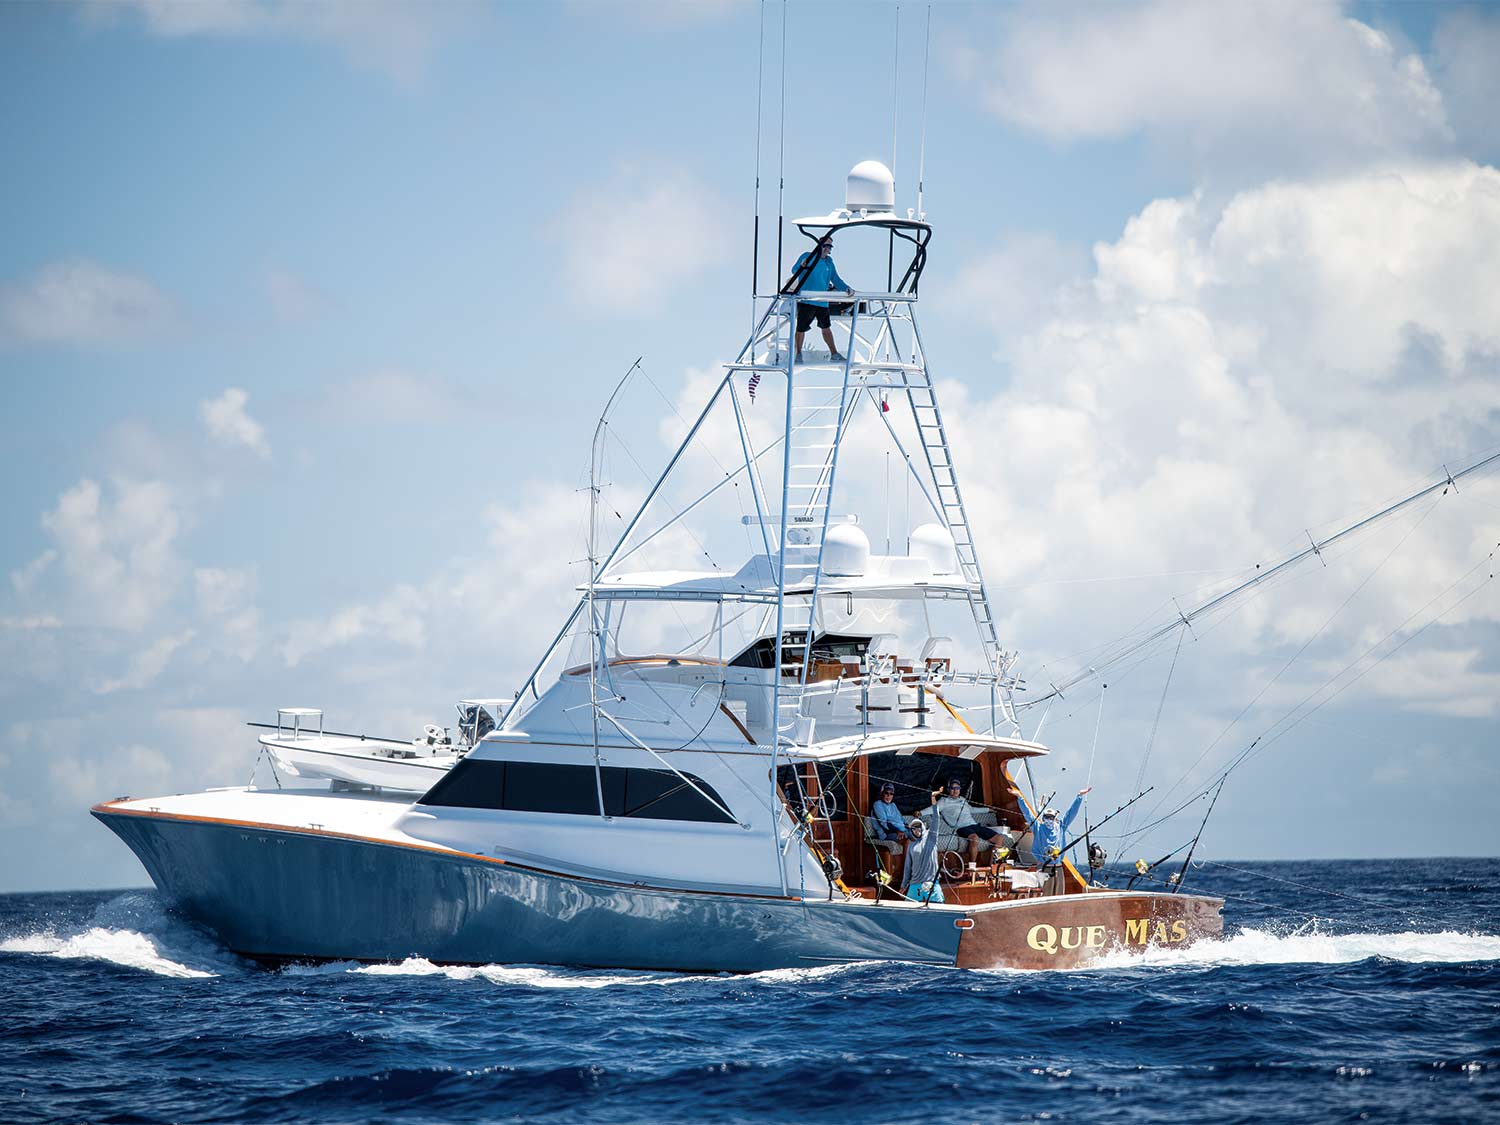 The Top Boat Names for Marlin Fishing